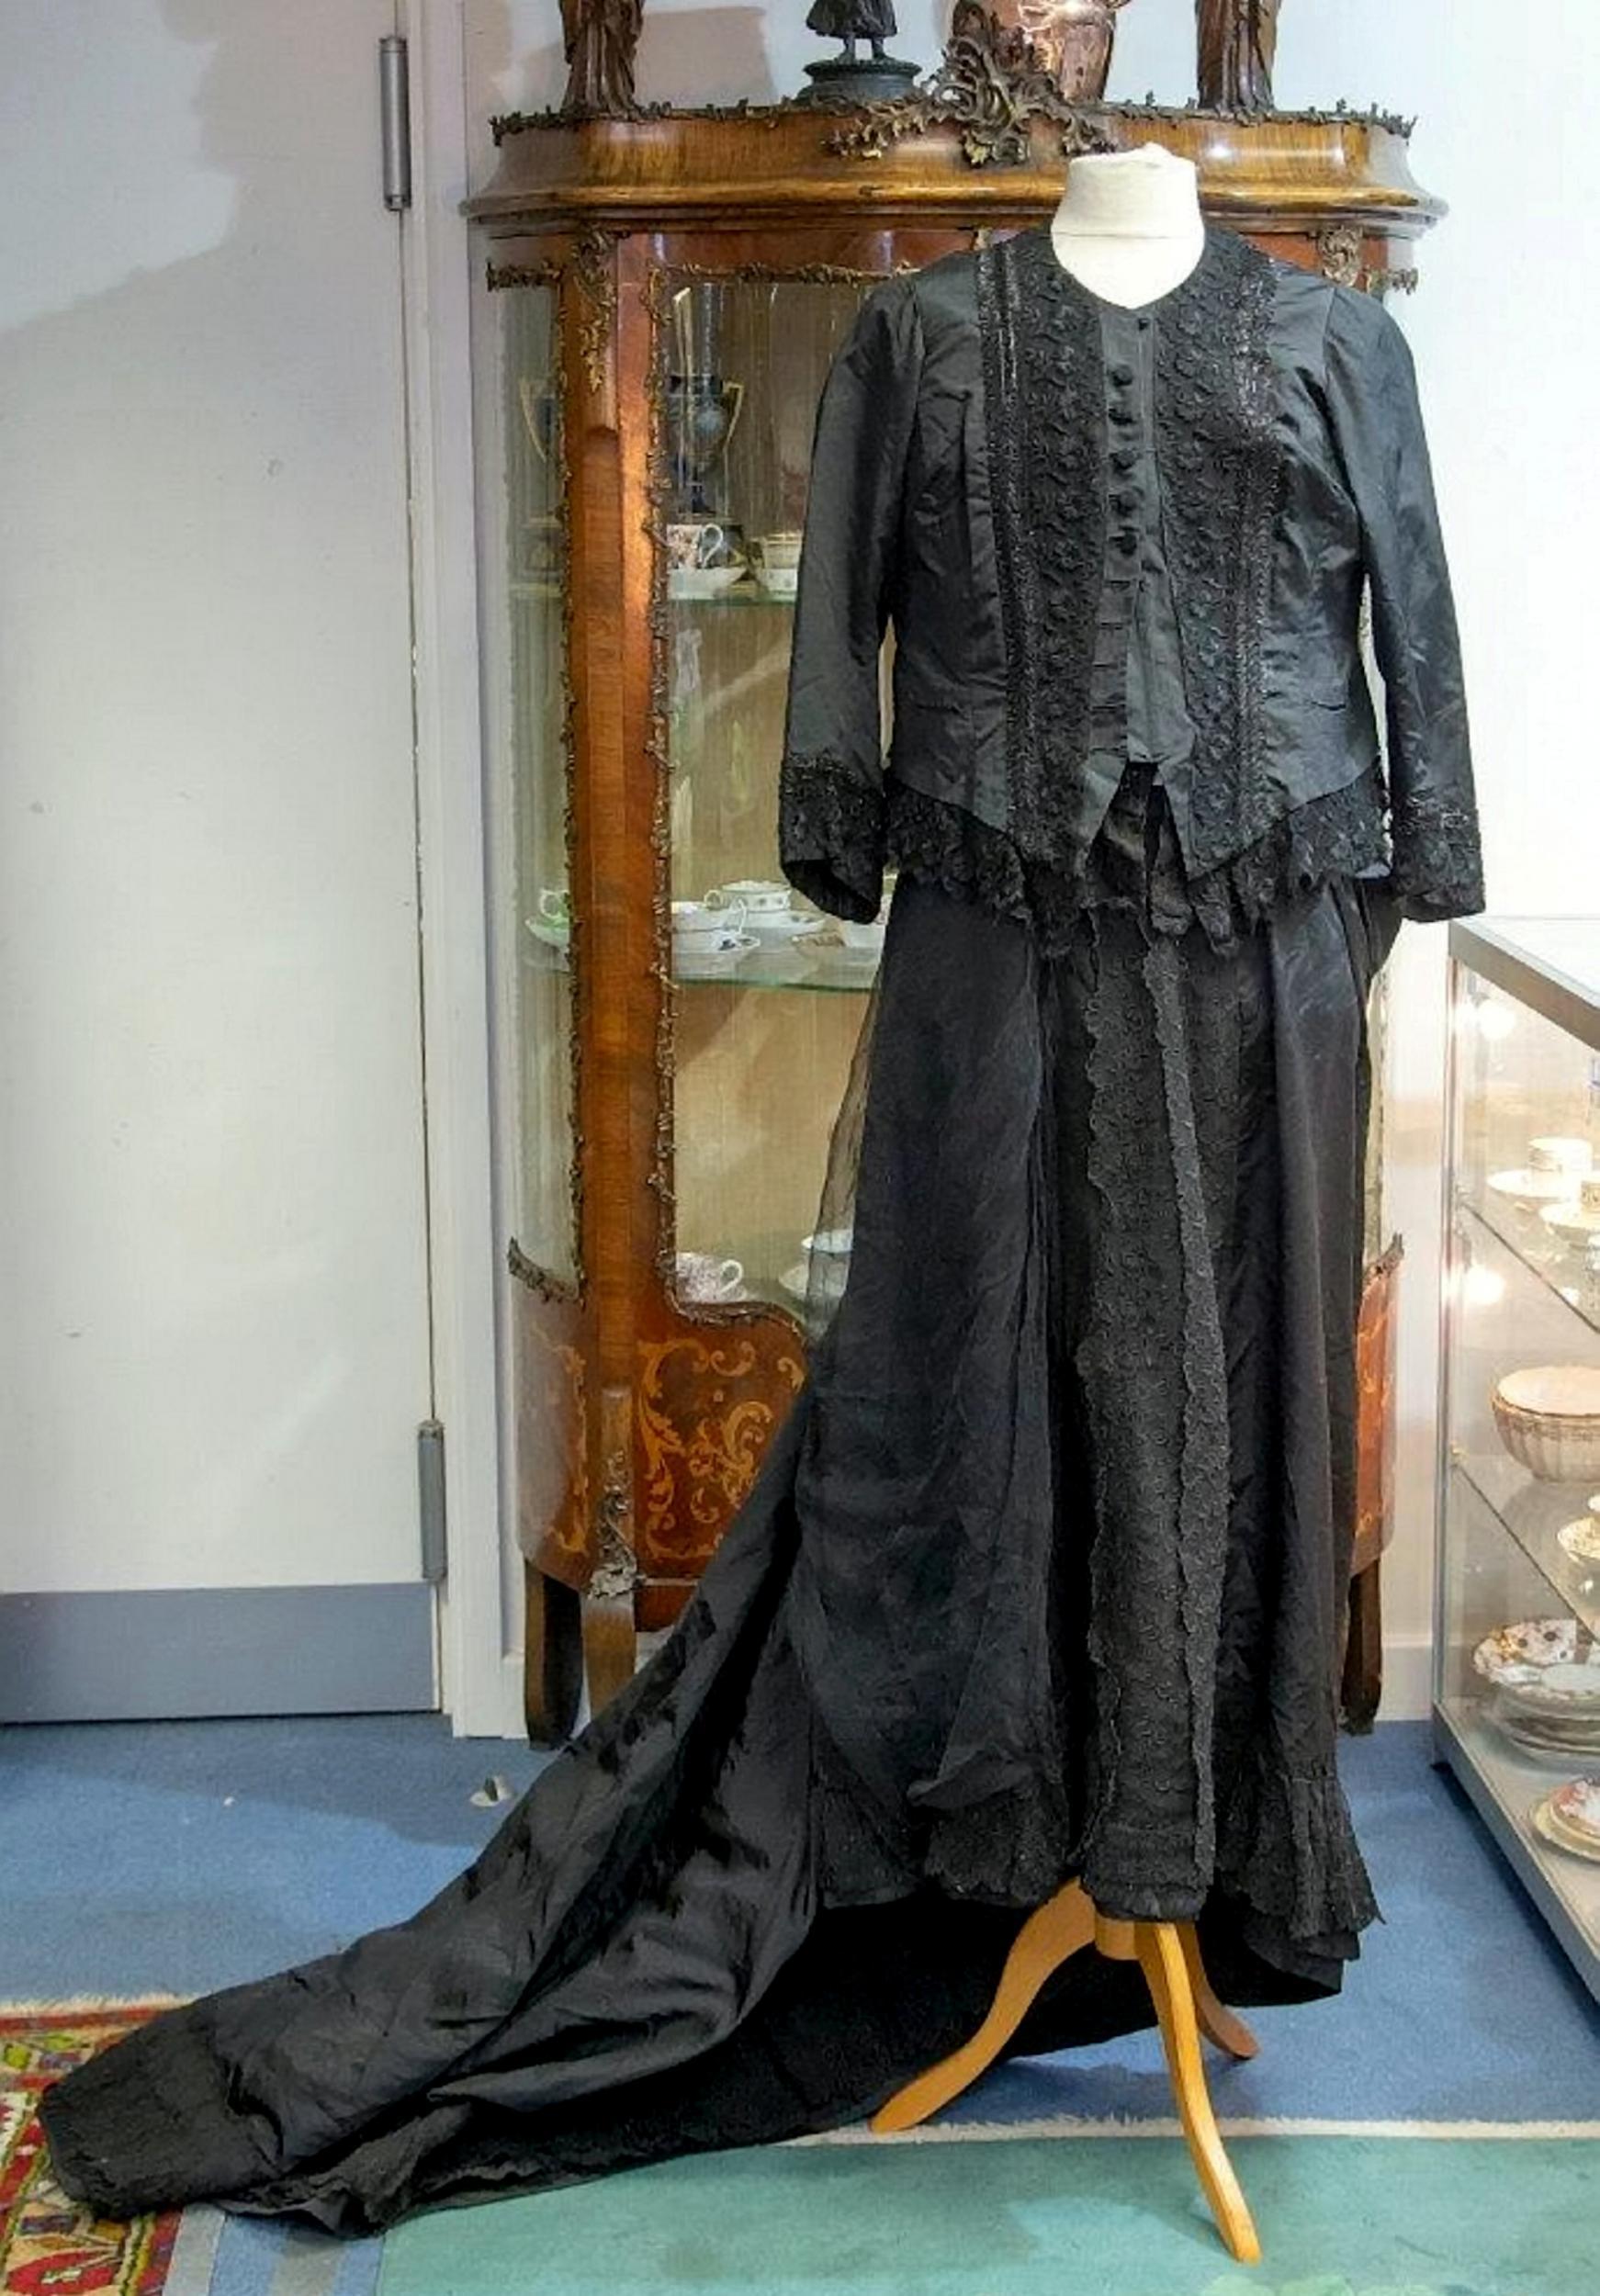 Queen Victoria famously wore black for the rest of her life following the death of her husband (SWNS)